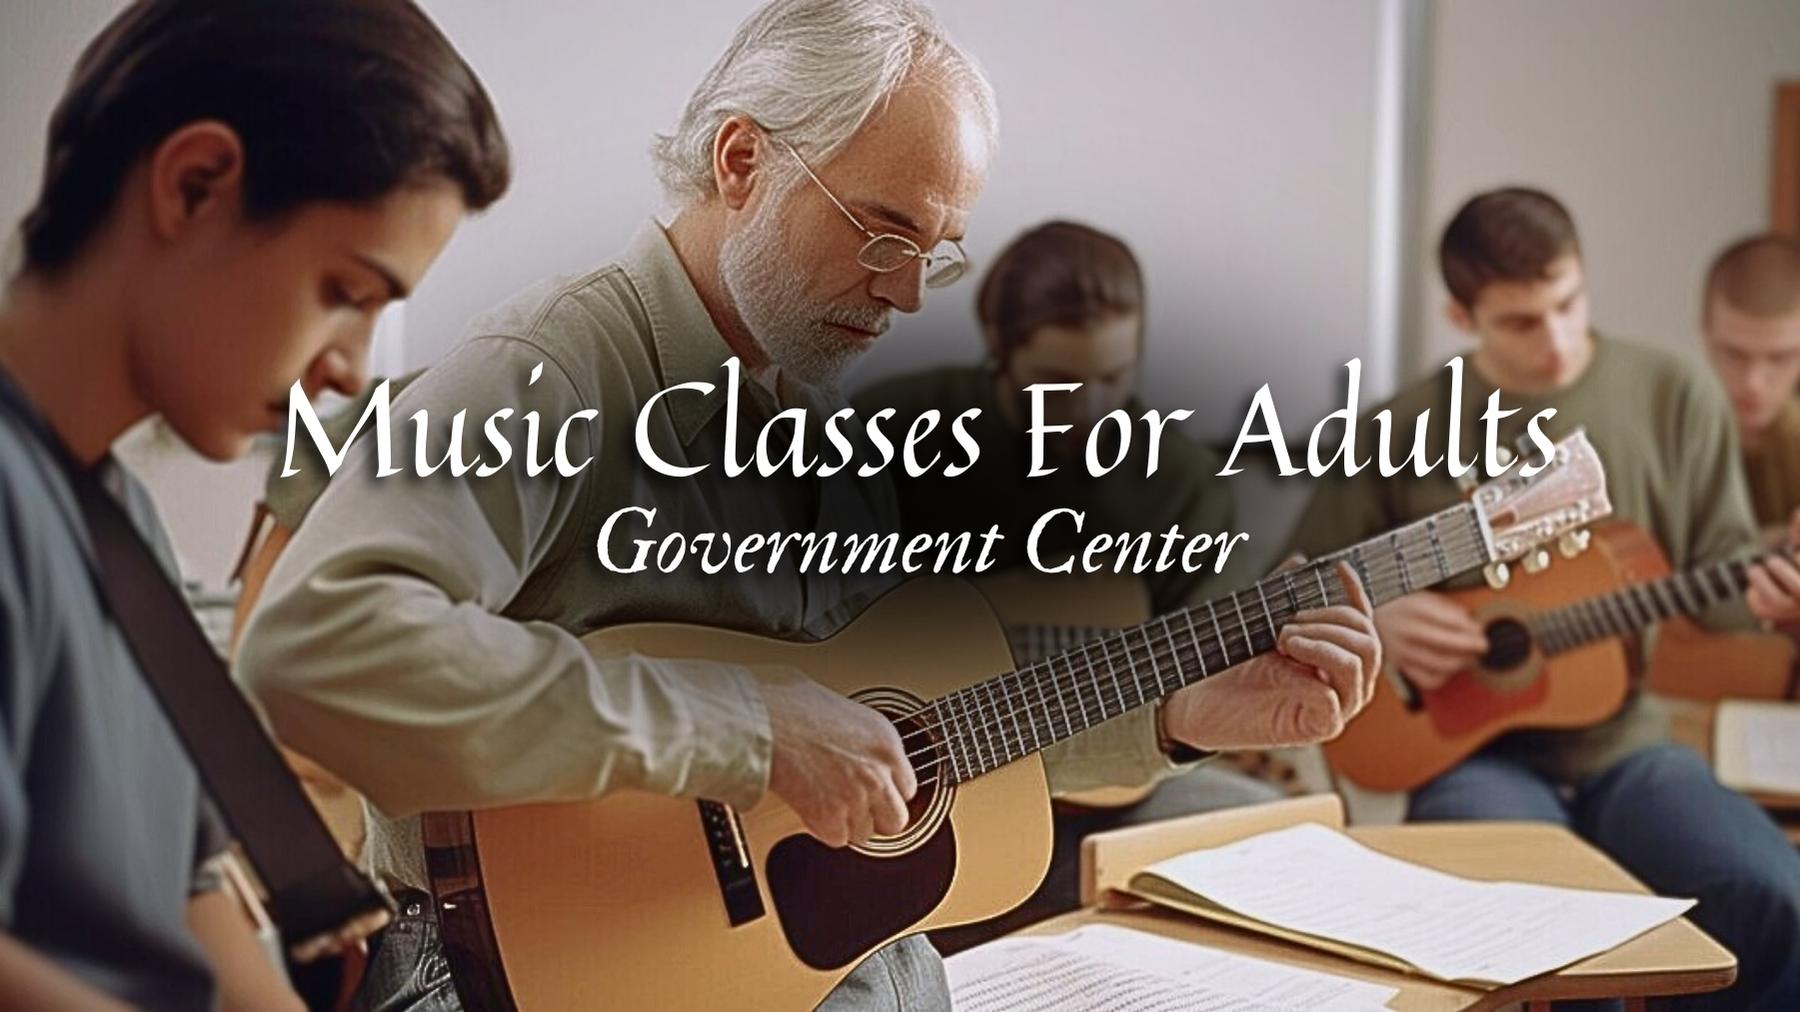 Music Classes for Adults in Government Center, Massachusetts